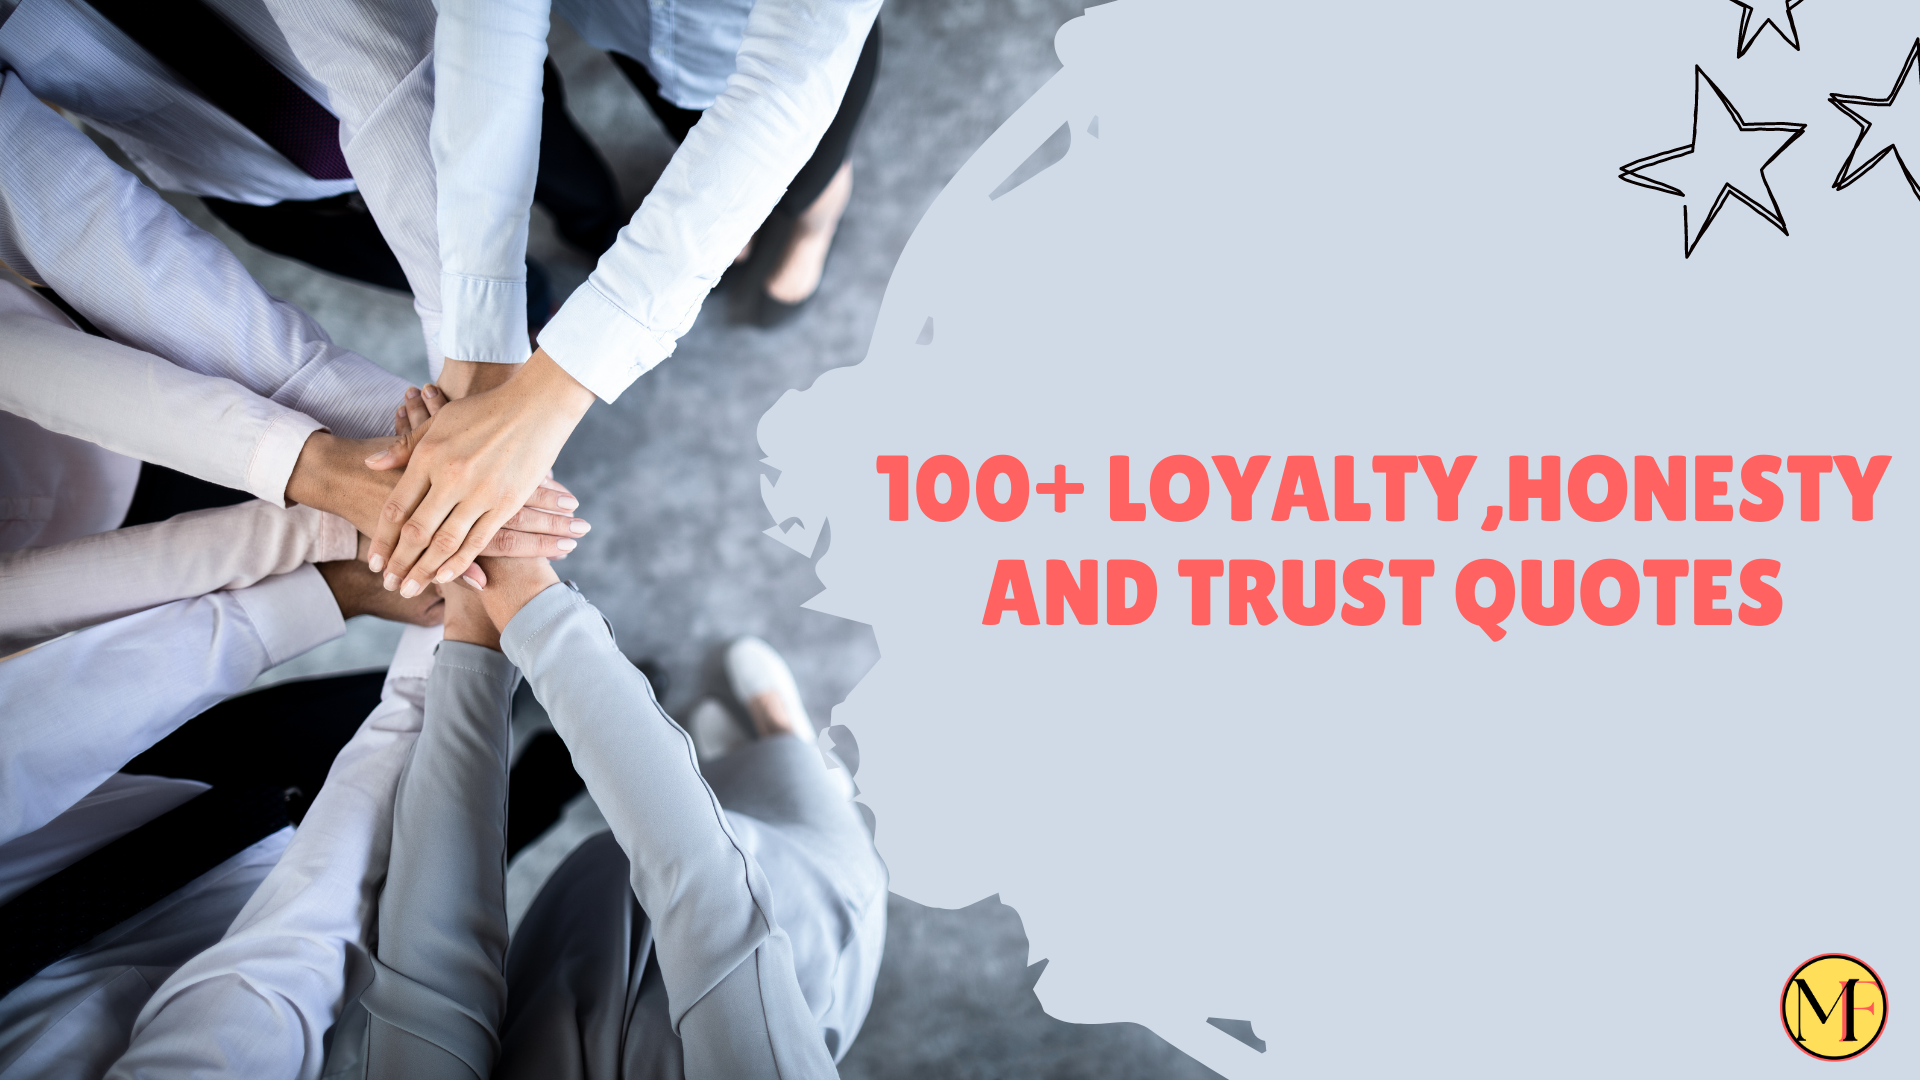 100+ Loyalty,Honesty and Trust Quotes